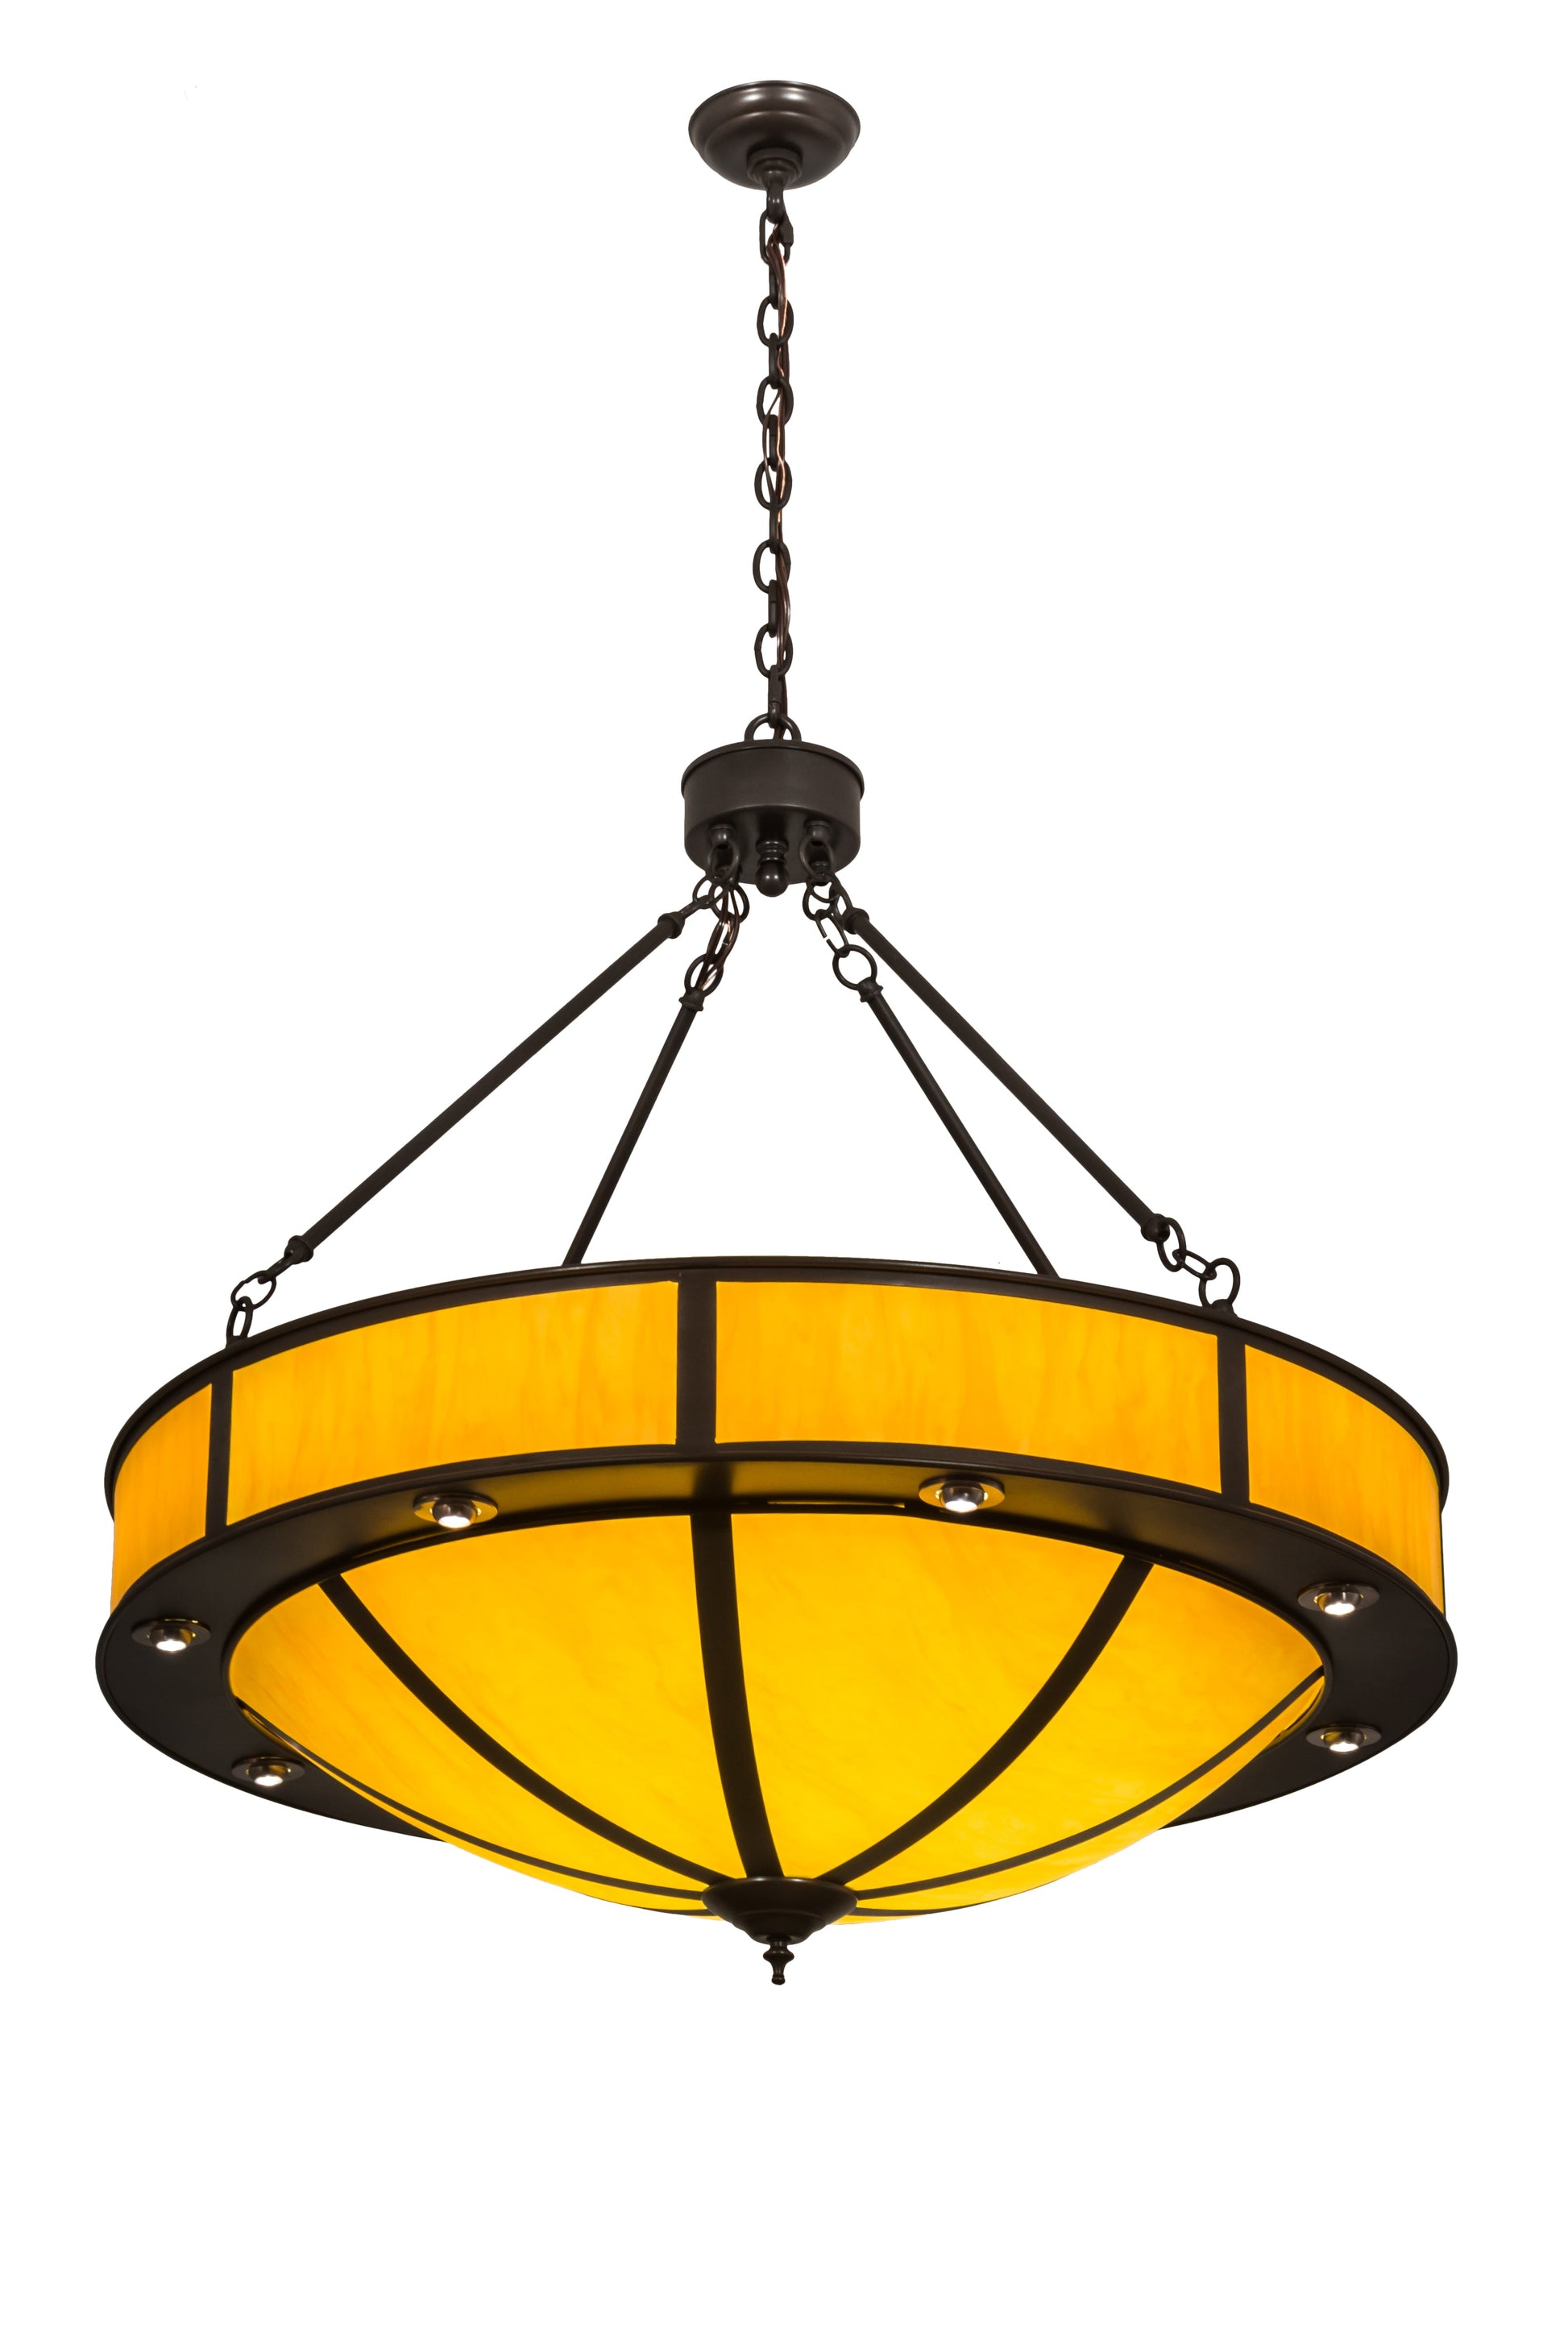 36" Arco Pendant by 2nd Ave Lighting